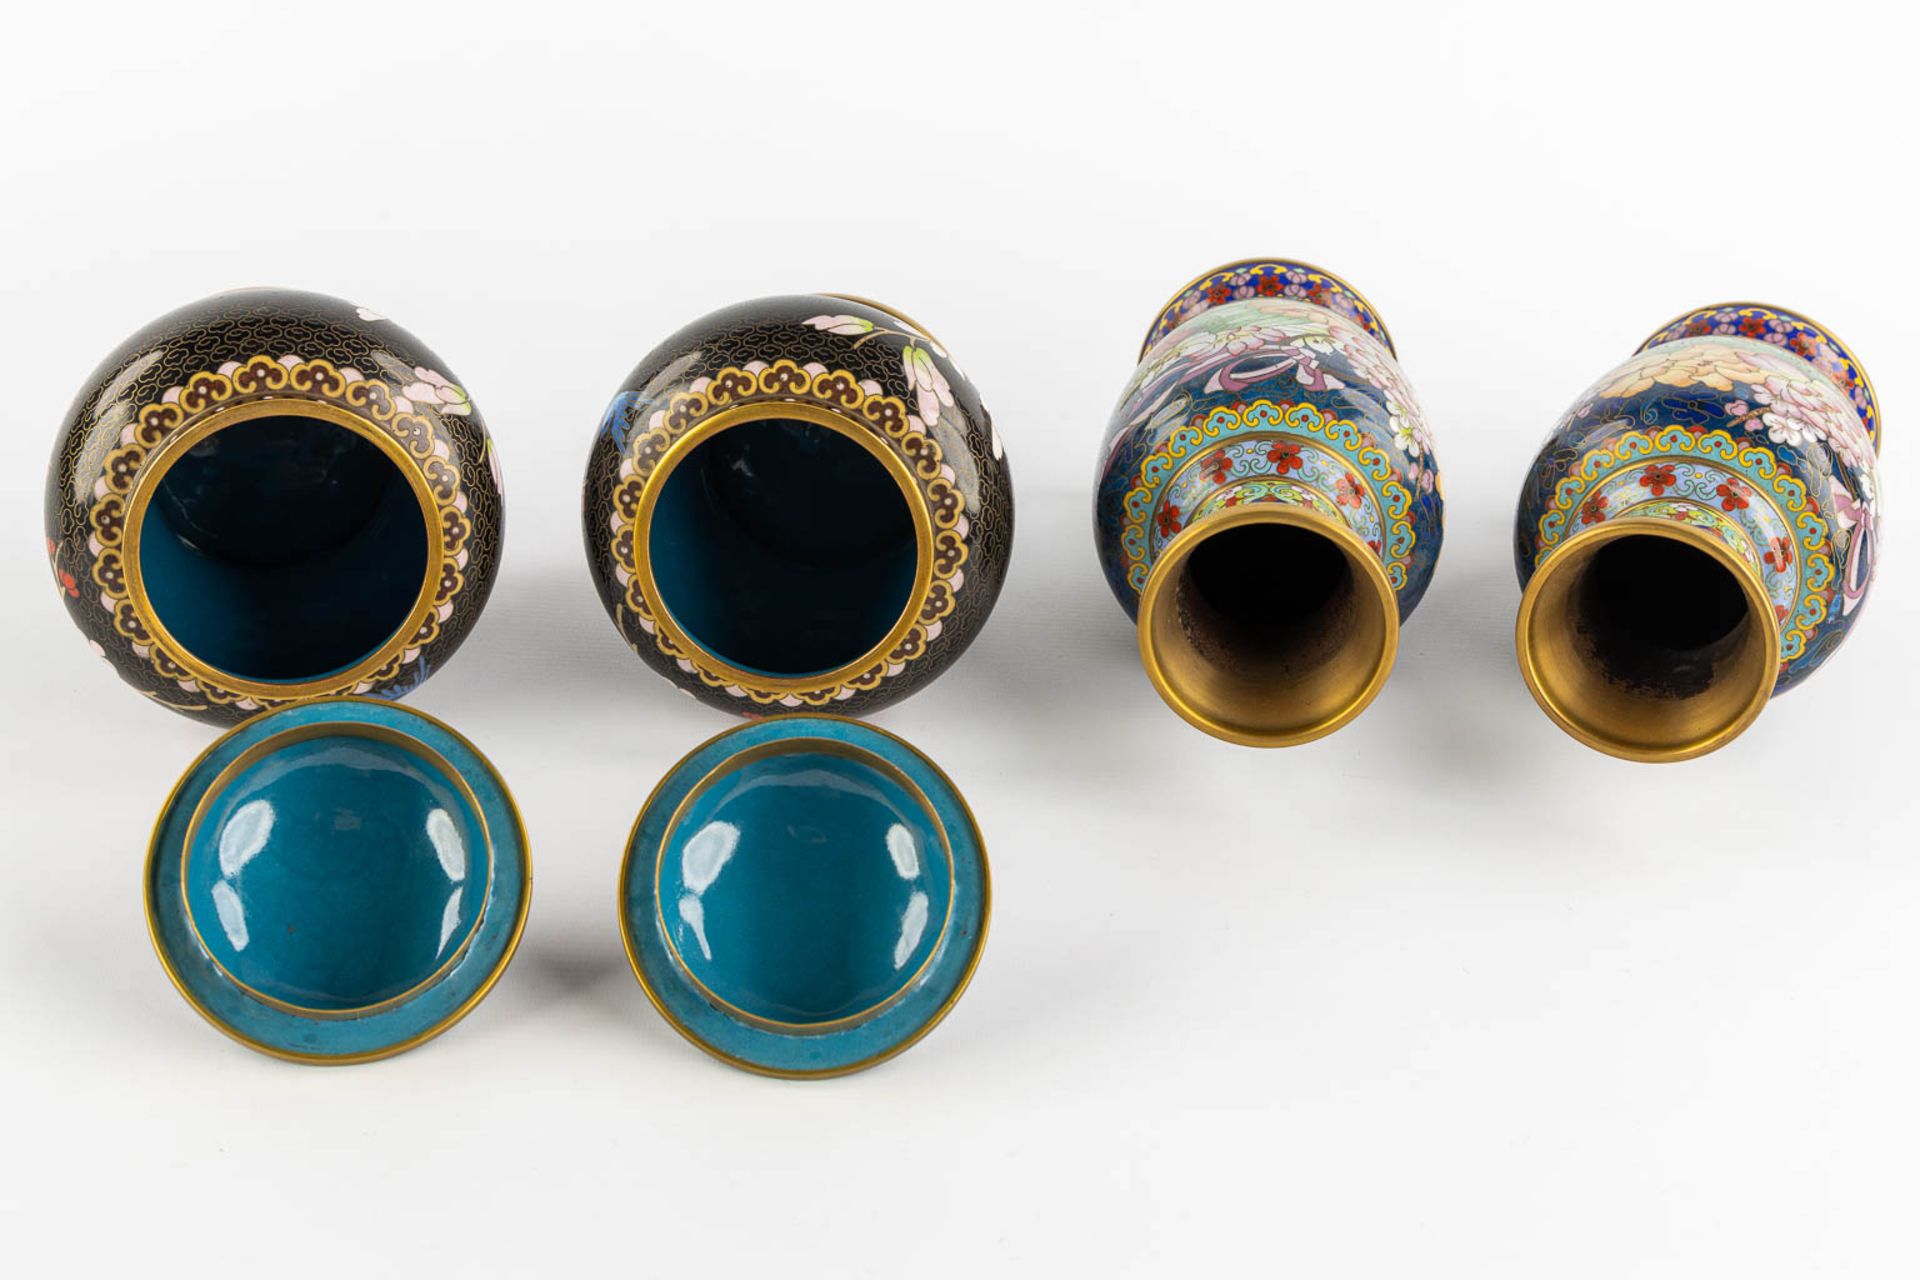 Twelve pieces of Cloisonné enamelled vases and trinklet bowls. Three pairs. (H:23 cm) - Image 13 of 14